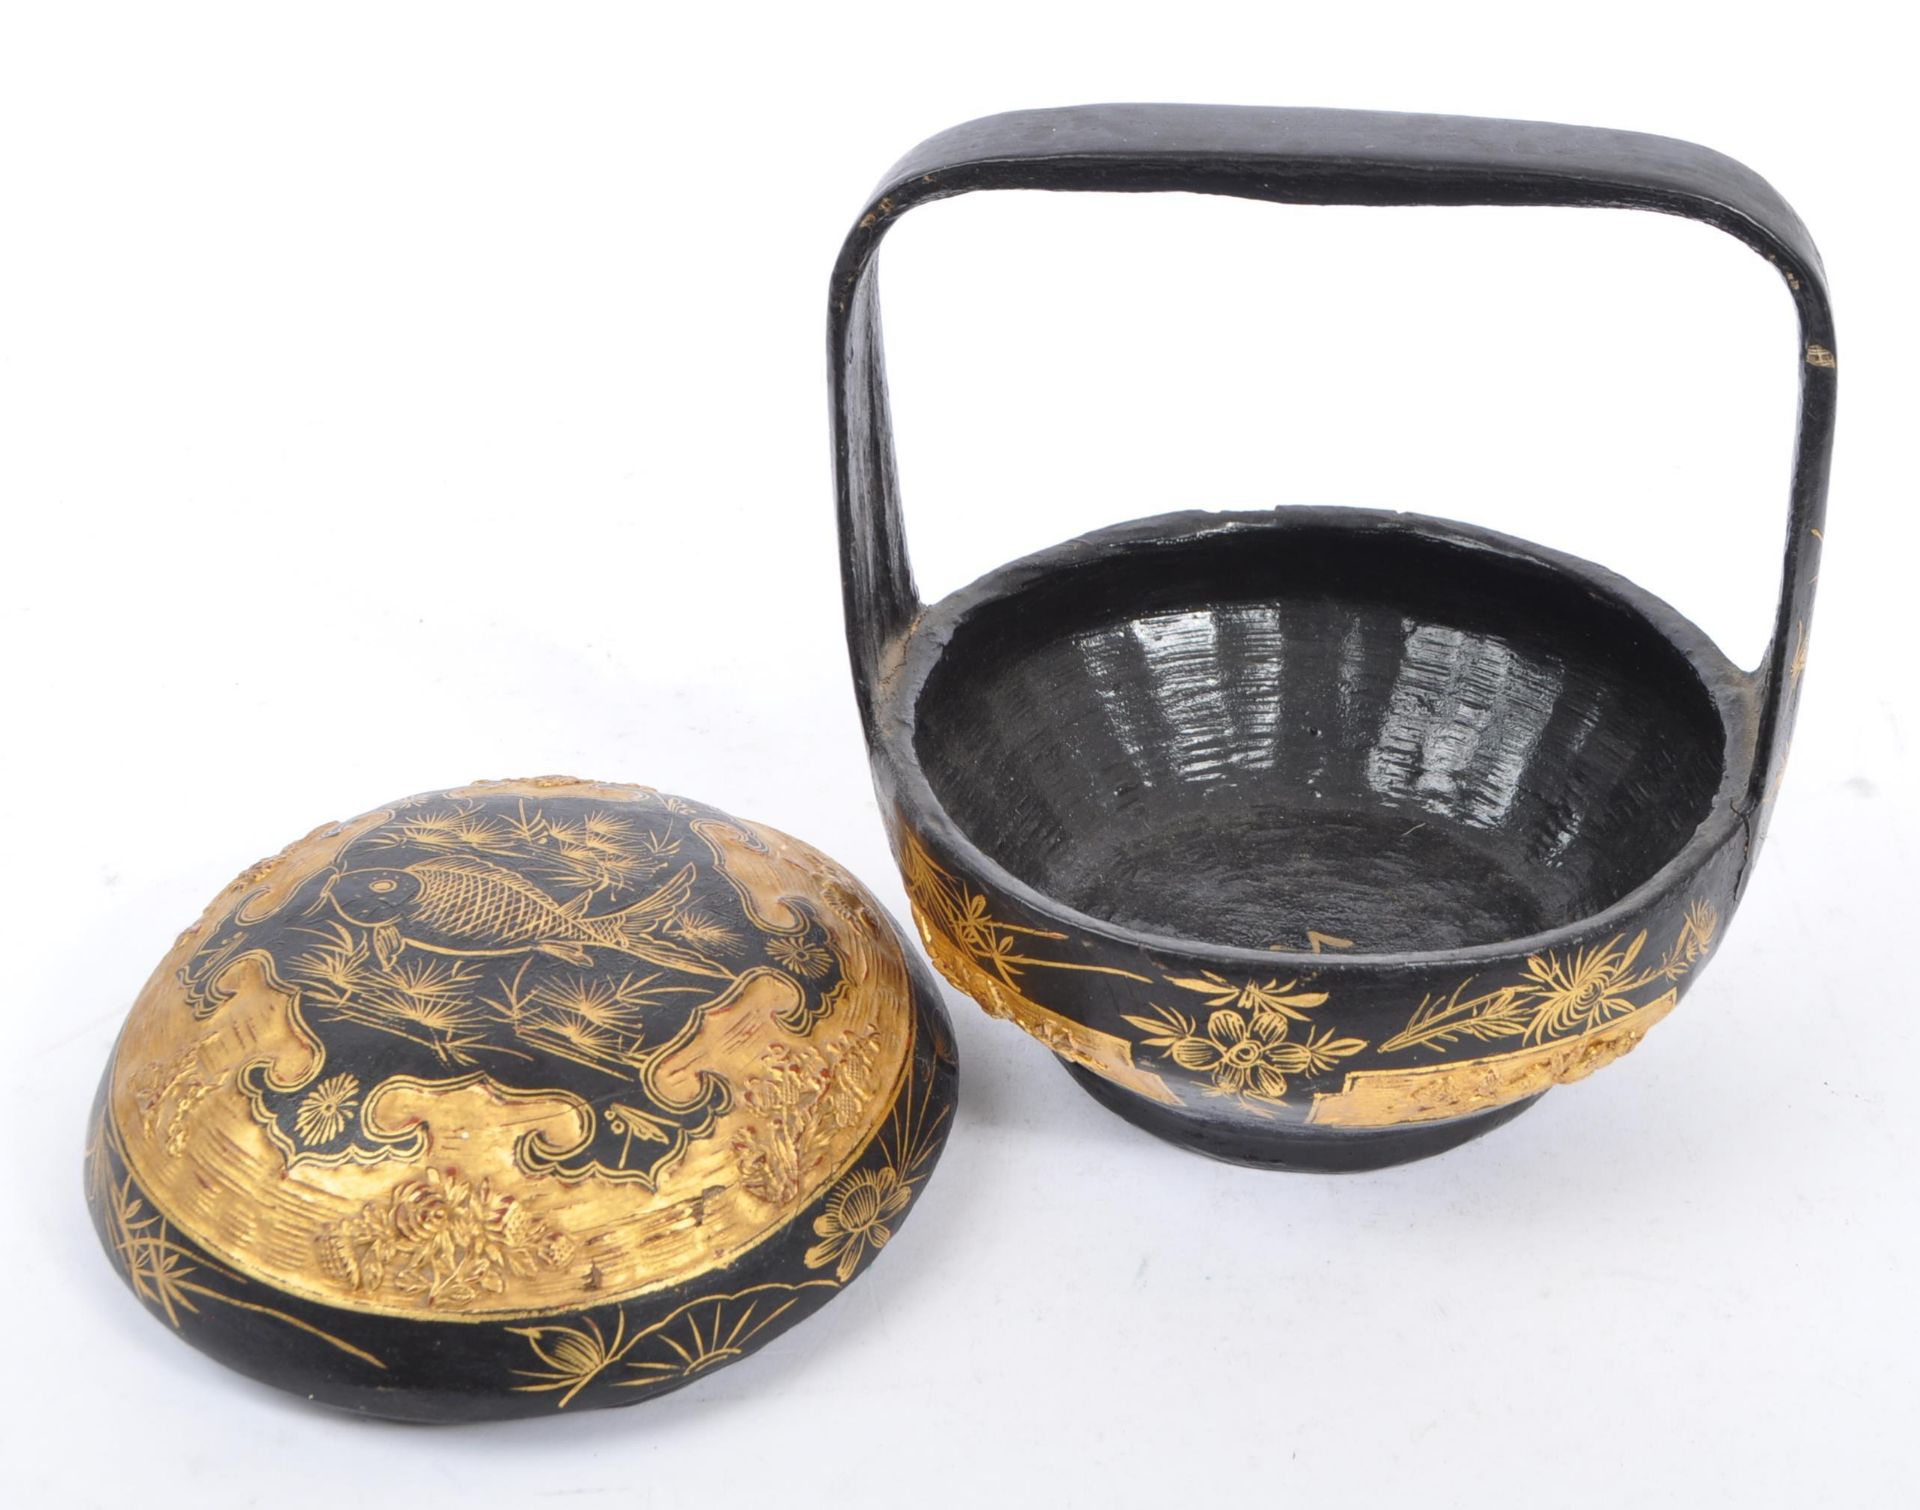 EARLY 20TH CENTURY 1920S CHINESE LAQUERED WEDDING BASKET - Image 5 of 7